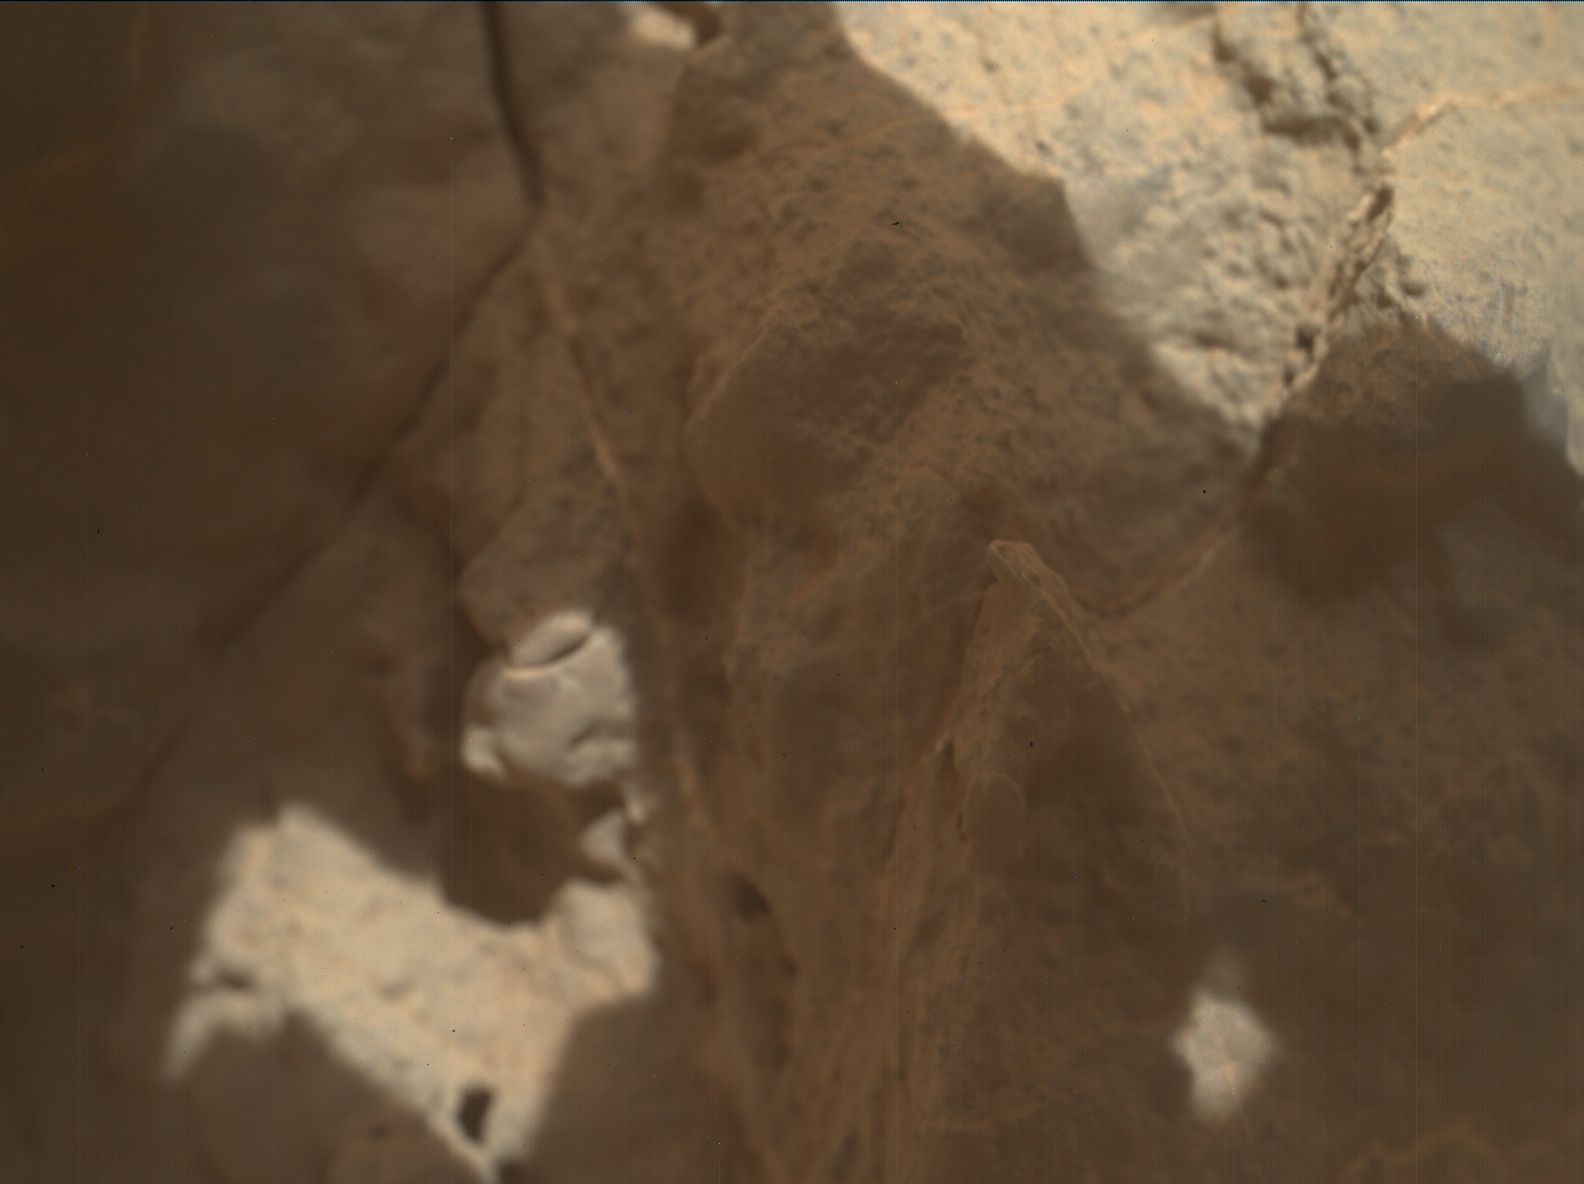 Nasa's Mars rover Curiosity acquired this image using its Mars Hand Lens Imager (MAHLI) on Sol 3558